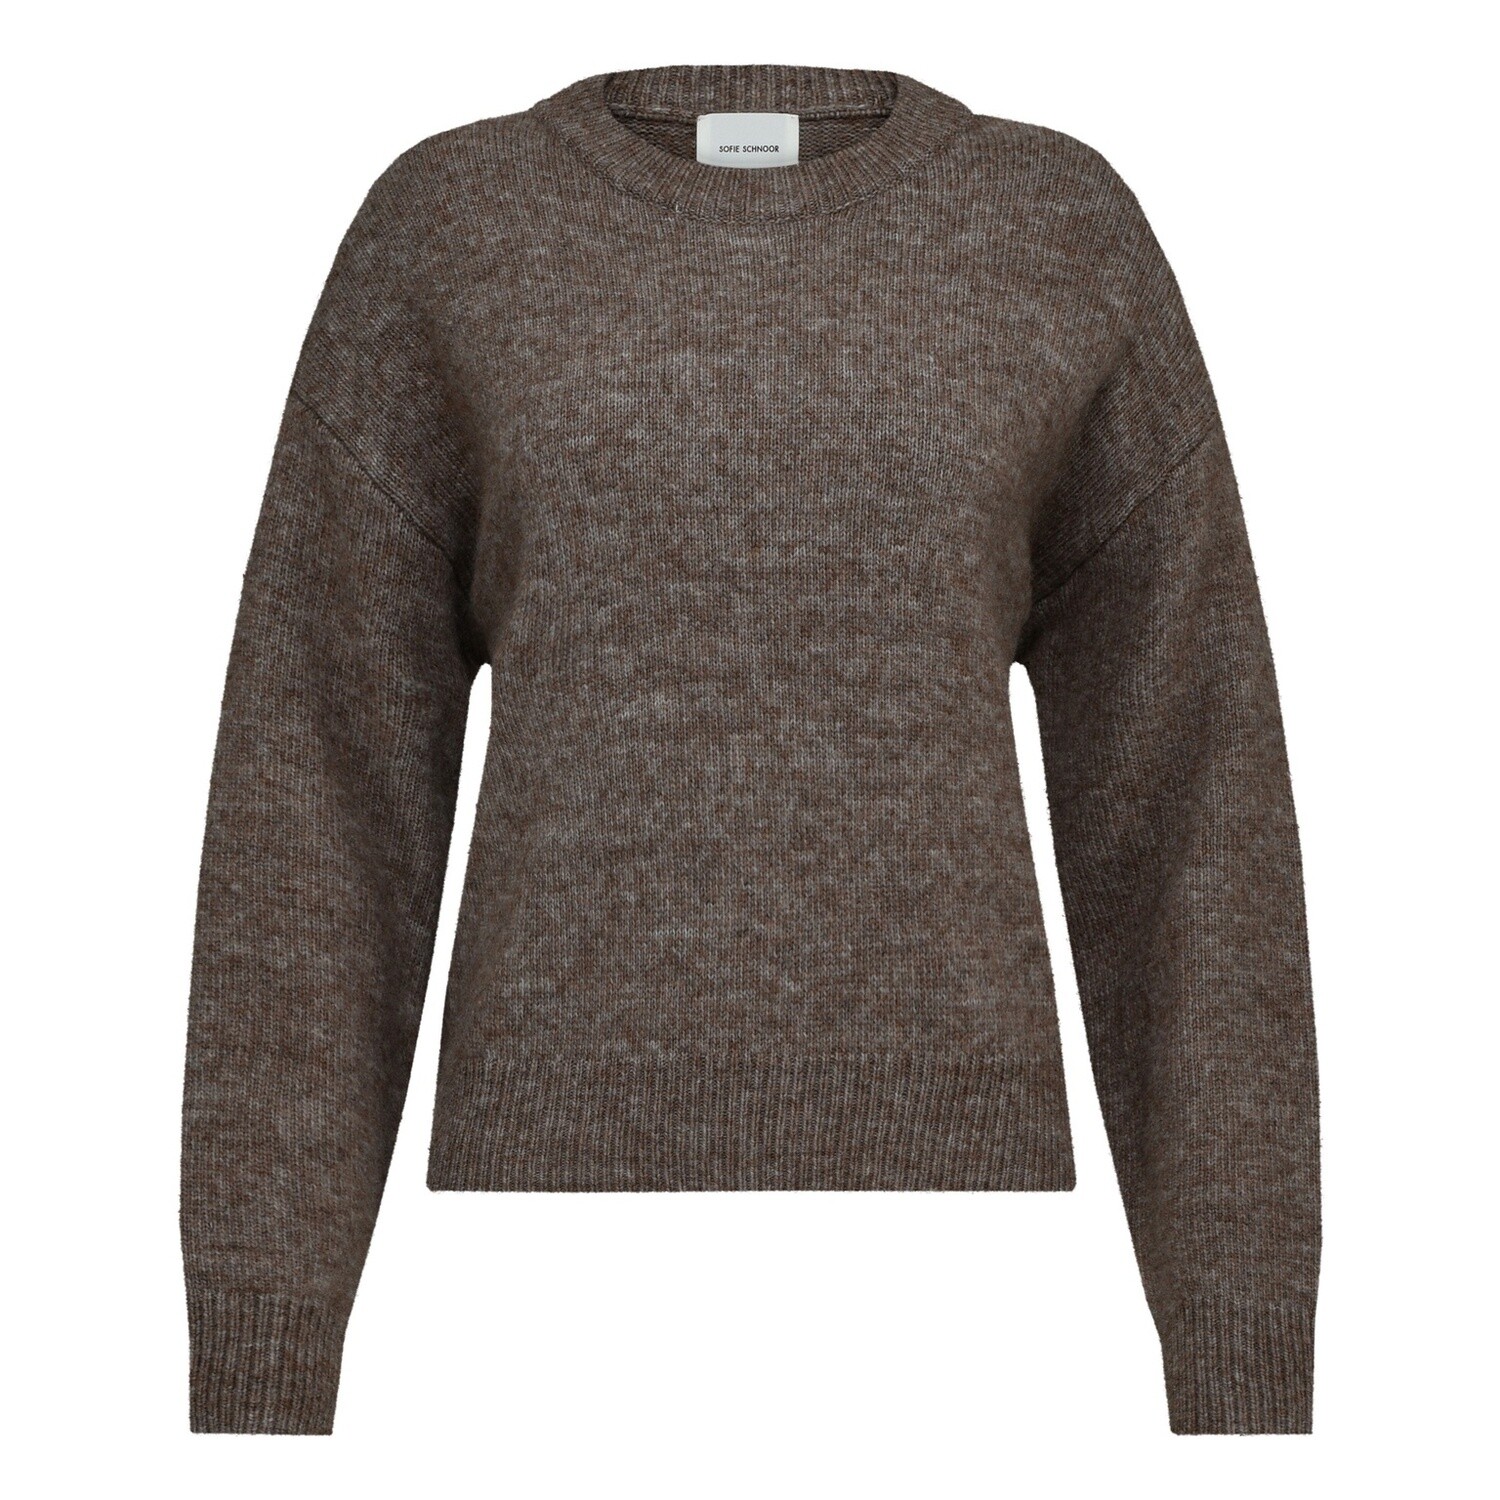 Melange Sweater, Colour: Brown, Size: Small